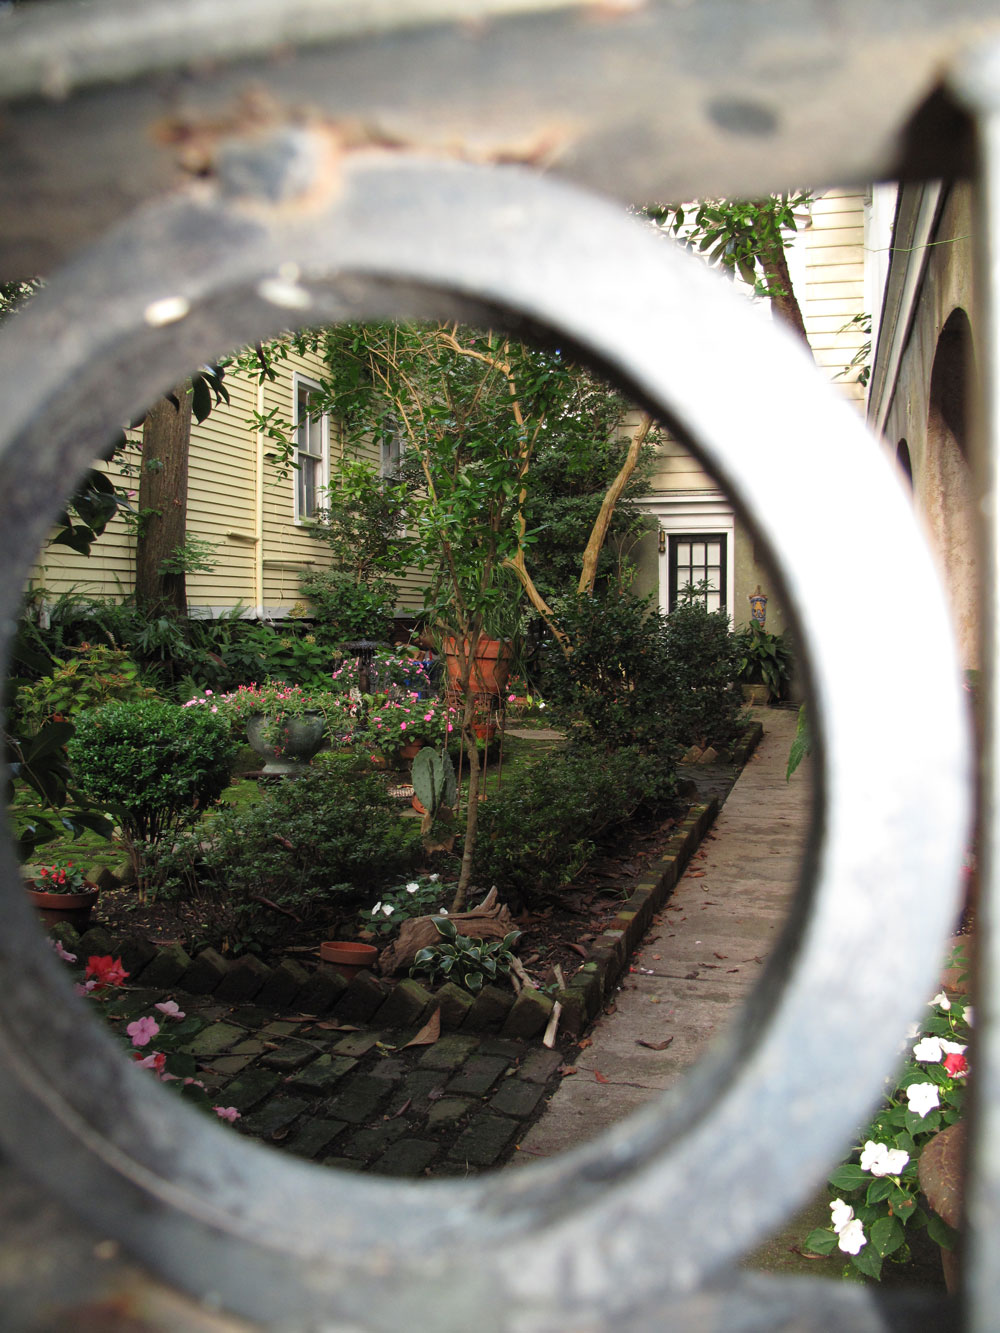 One of the hundreds of secret gardens you can spy while walking around the city.